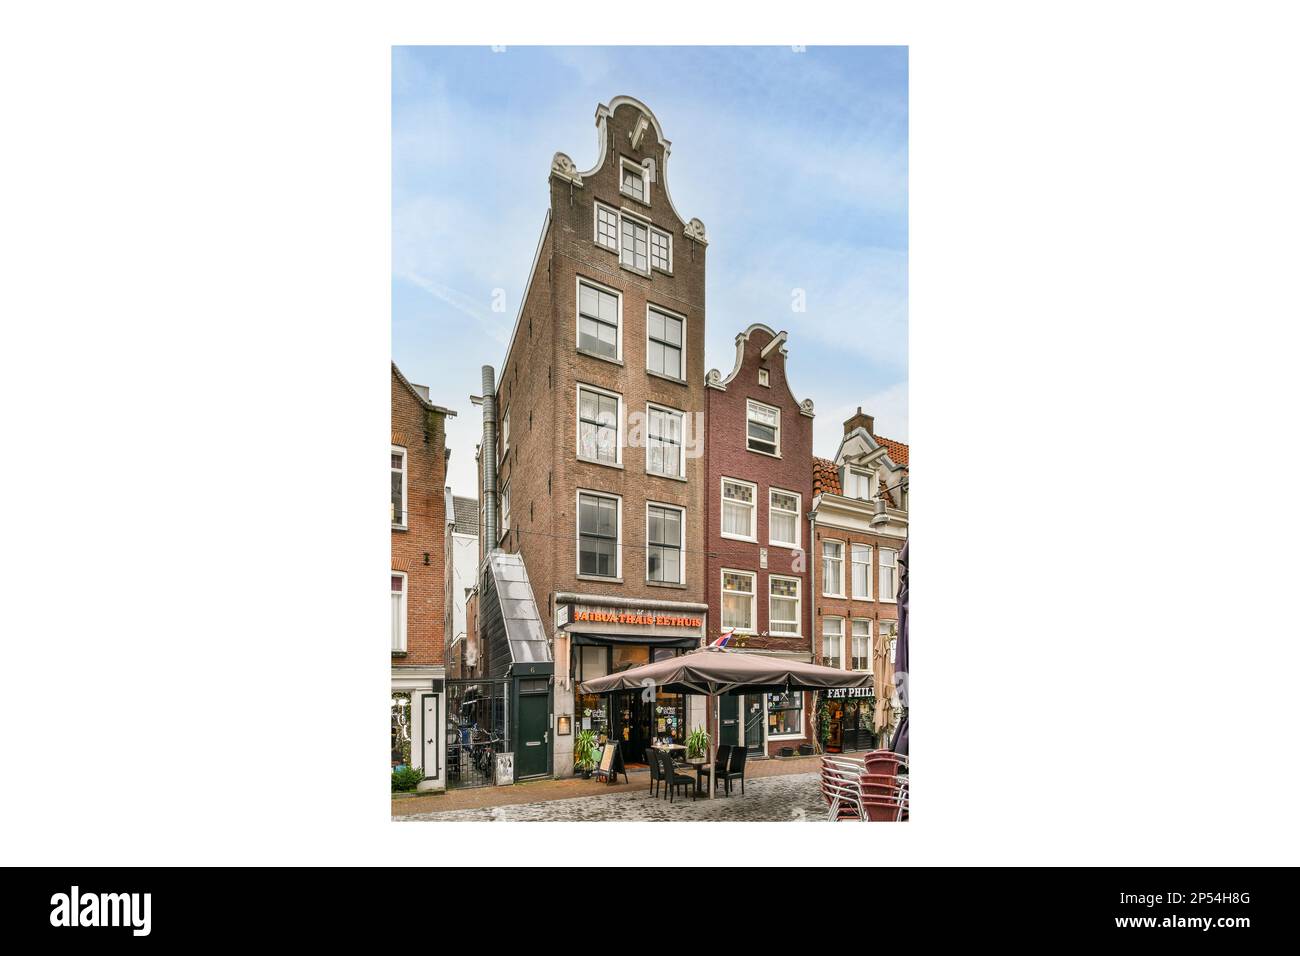 Amsterdam, Netherlands - 10 April, 2021: an old building with a clock on it's side and people walking in the street next to each other buildings Stock Photo